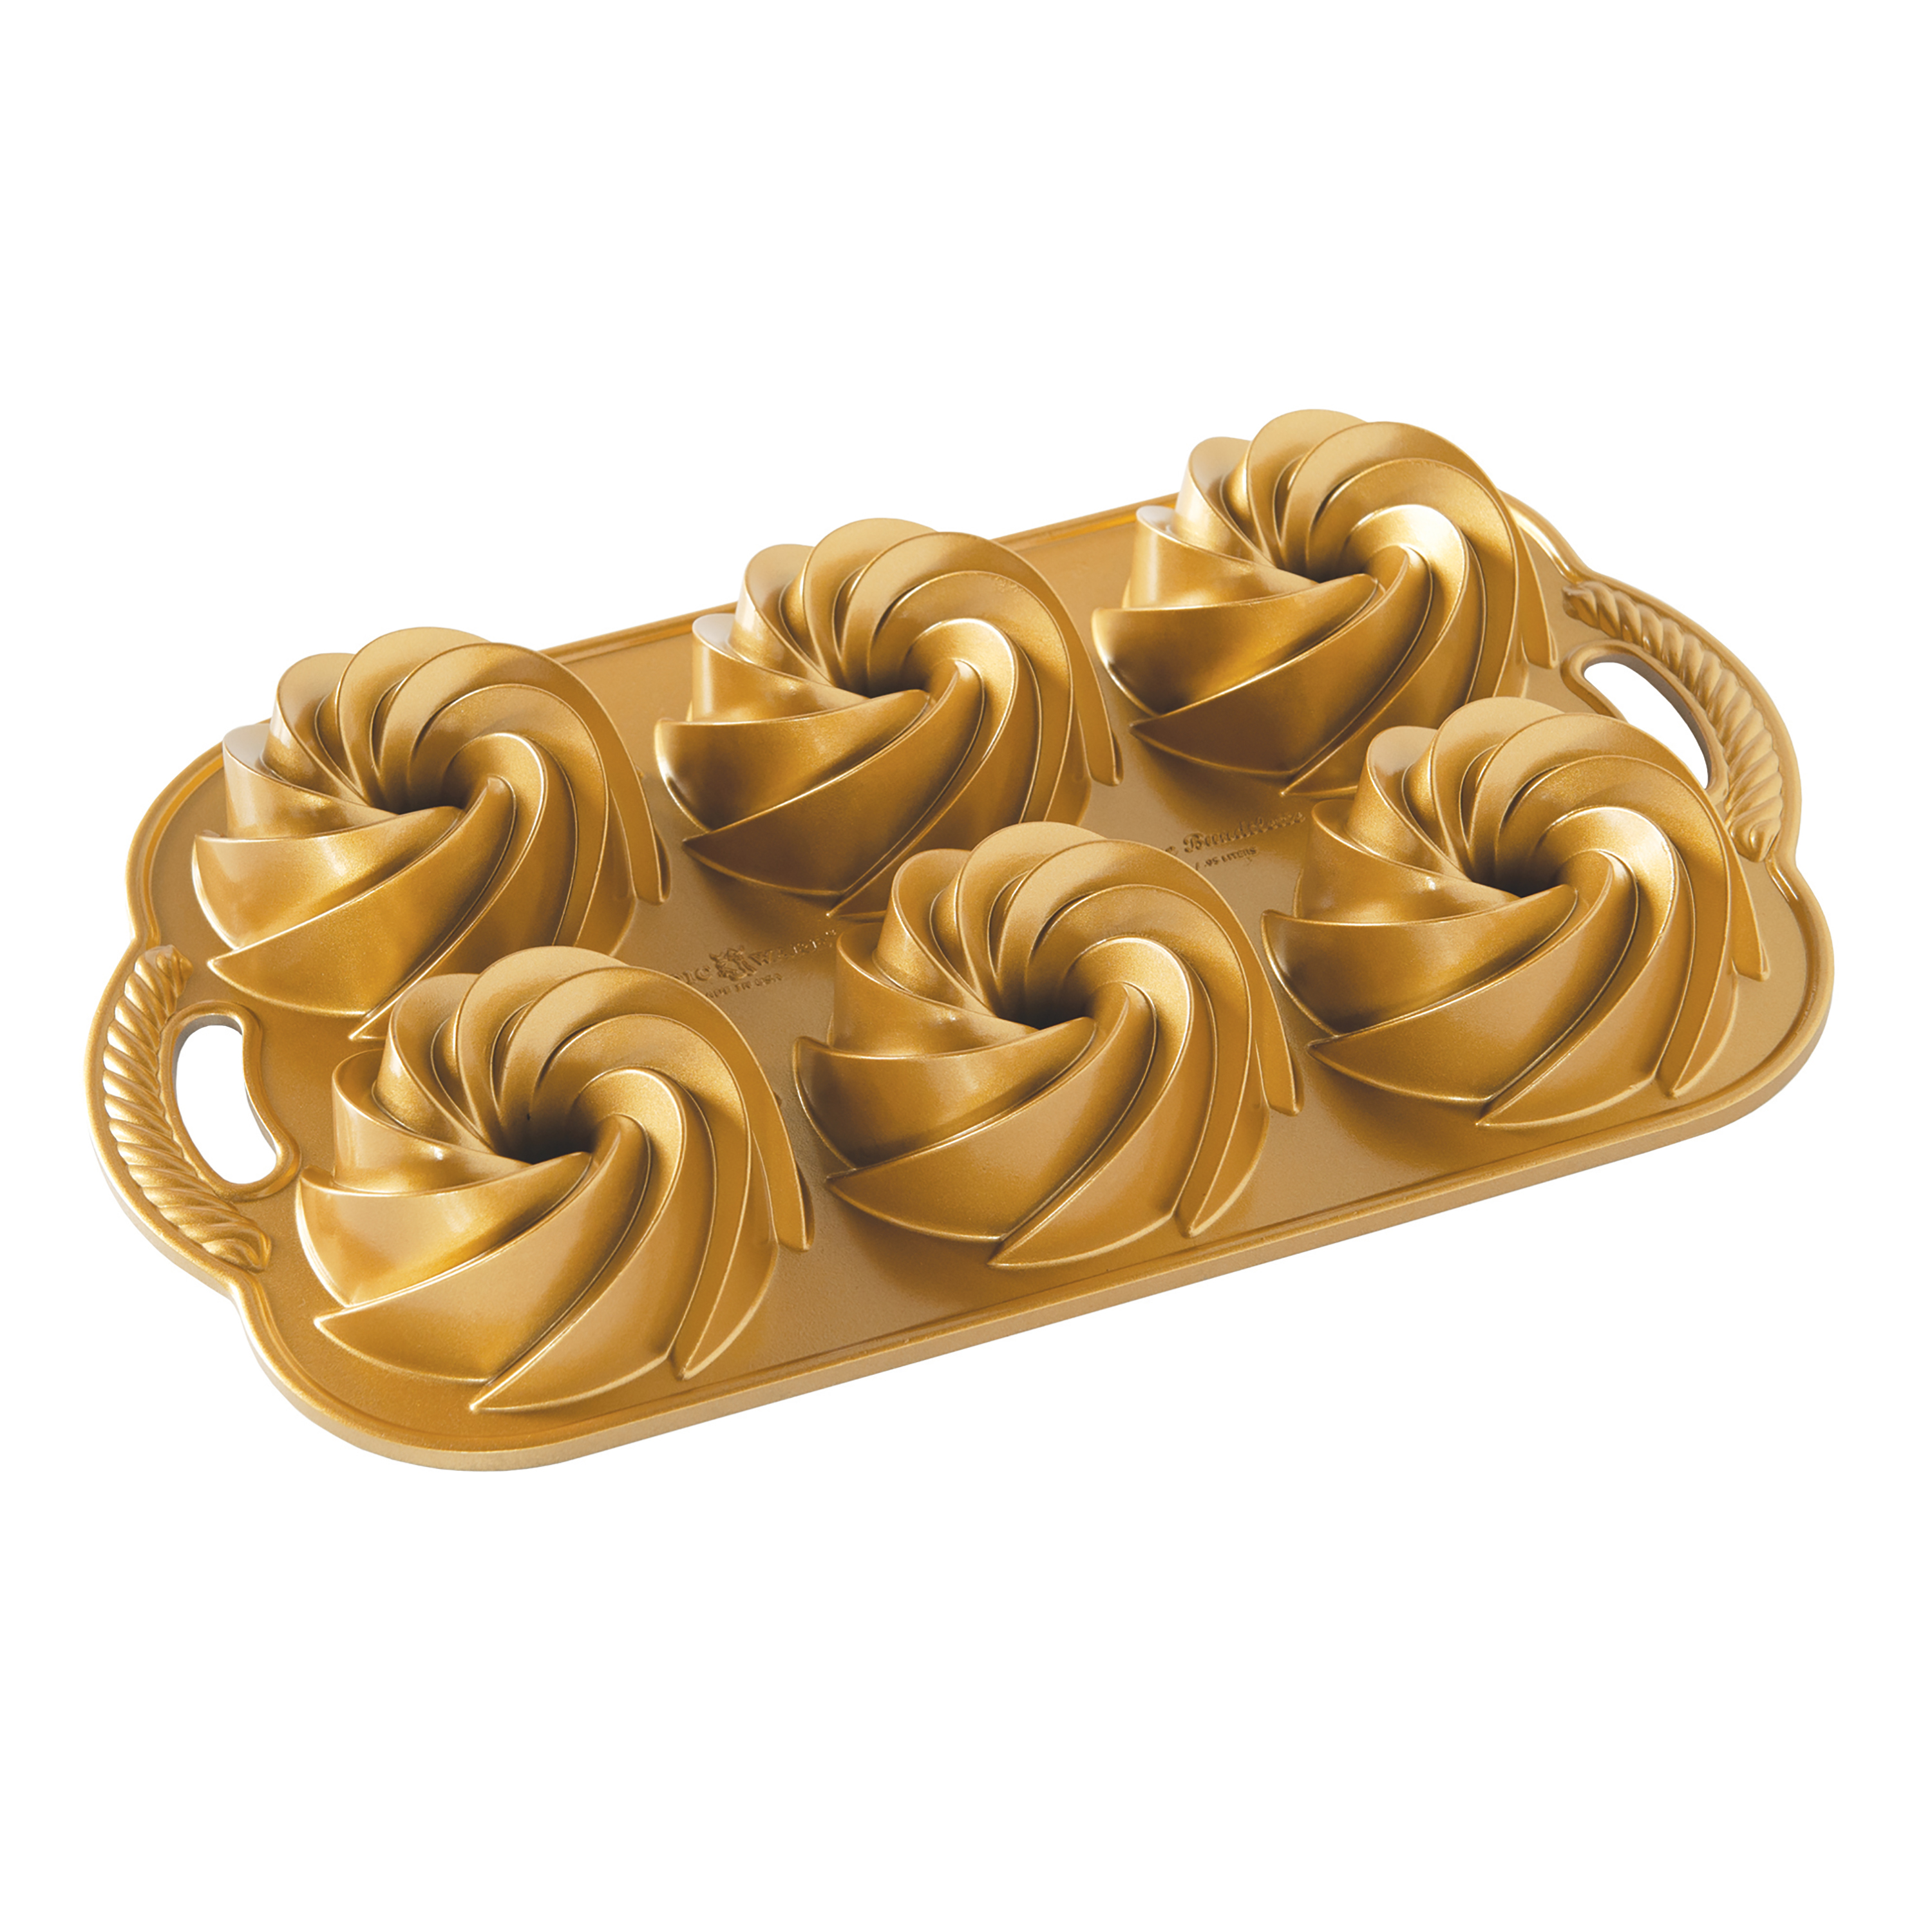  Nordic Ware Classic Fluted Loaf Pan, 6 Cup, Gold: Home & Kitchen